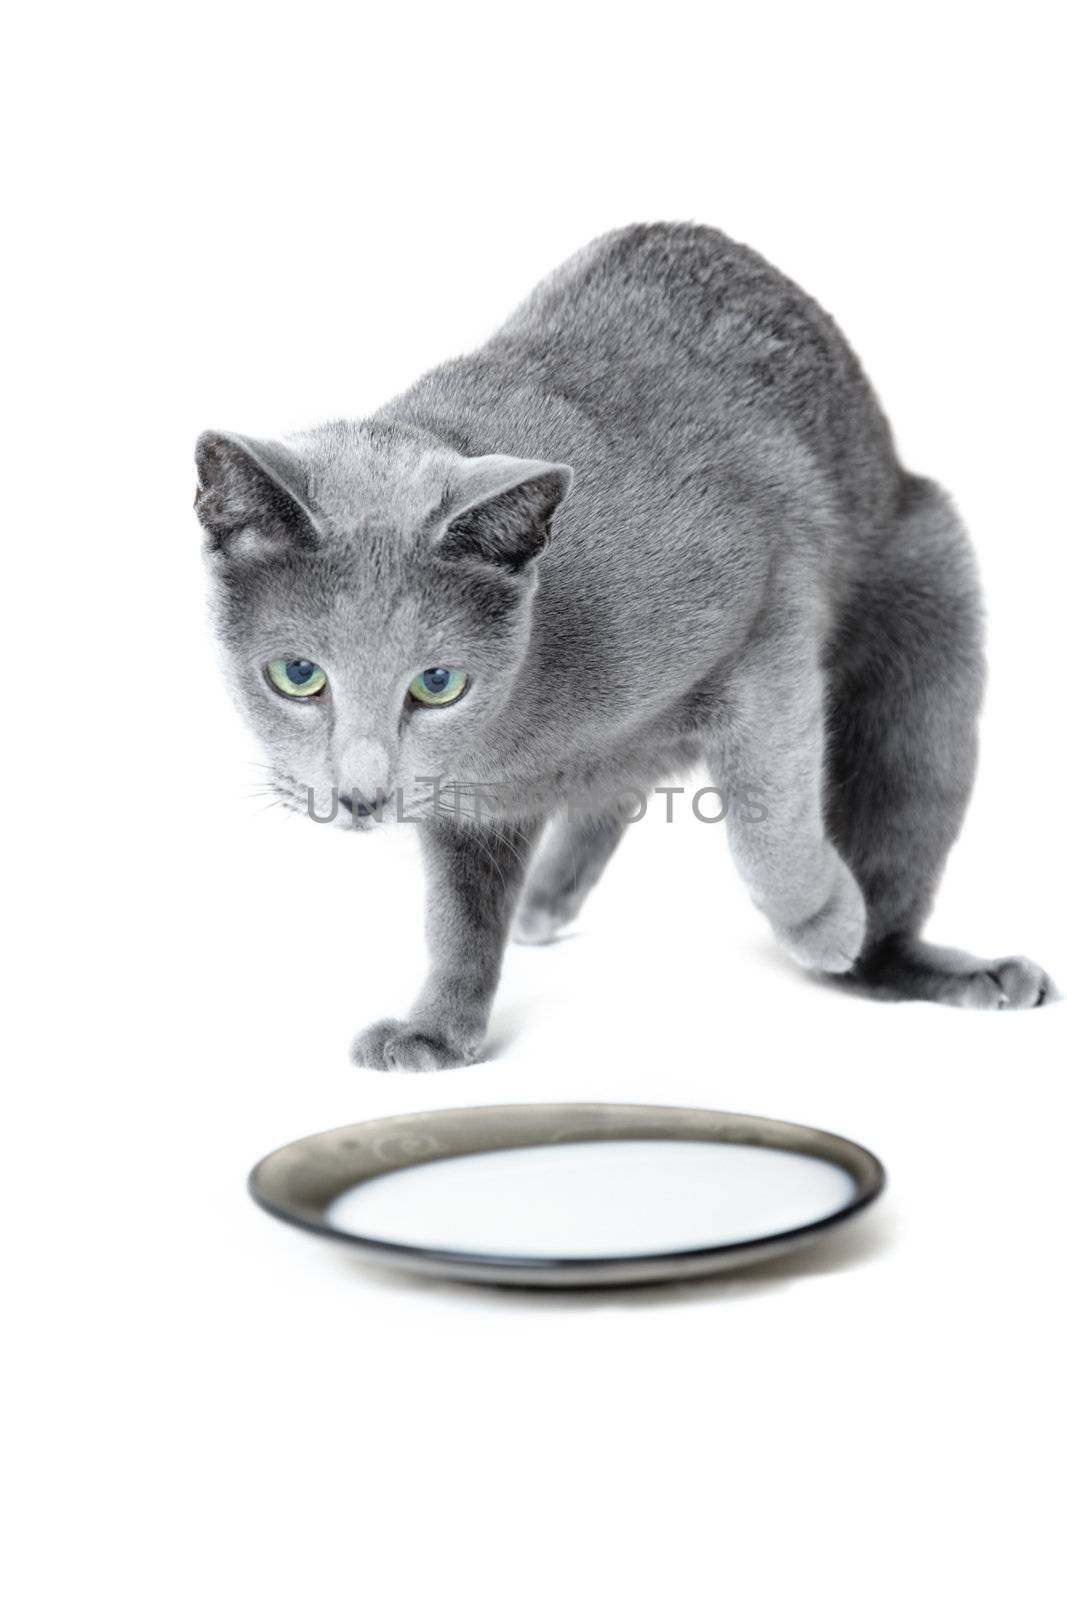 Russian blue cat near the plate with milk on a white background